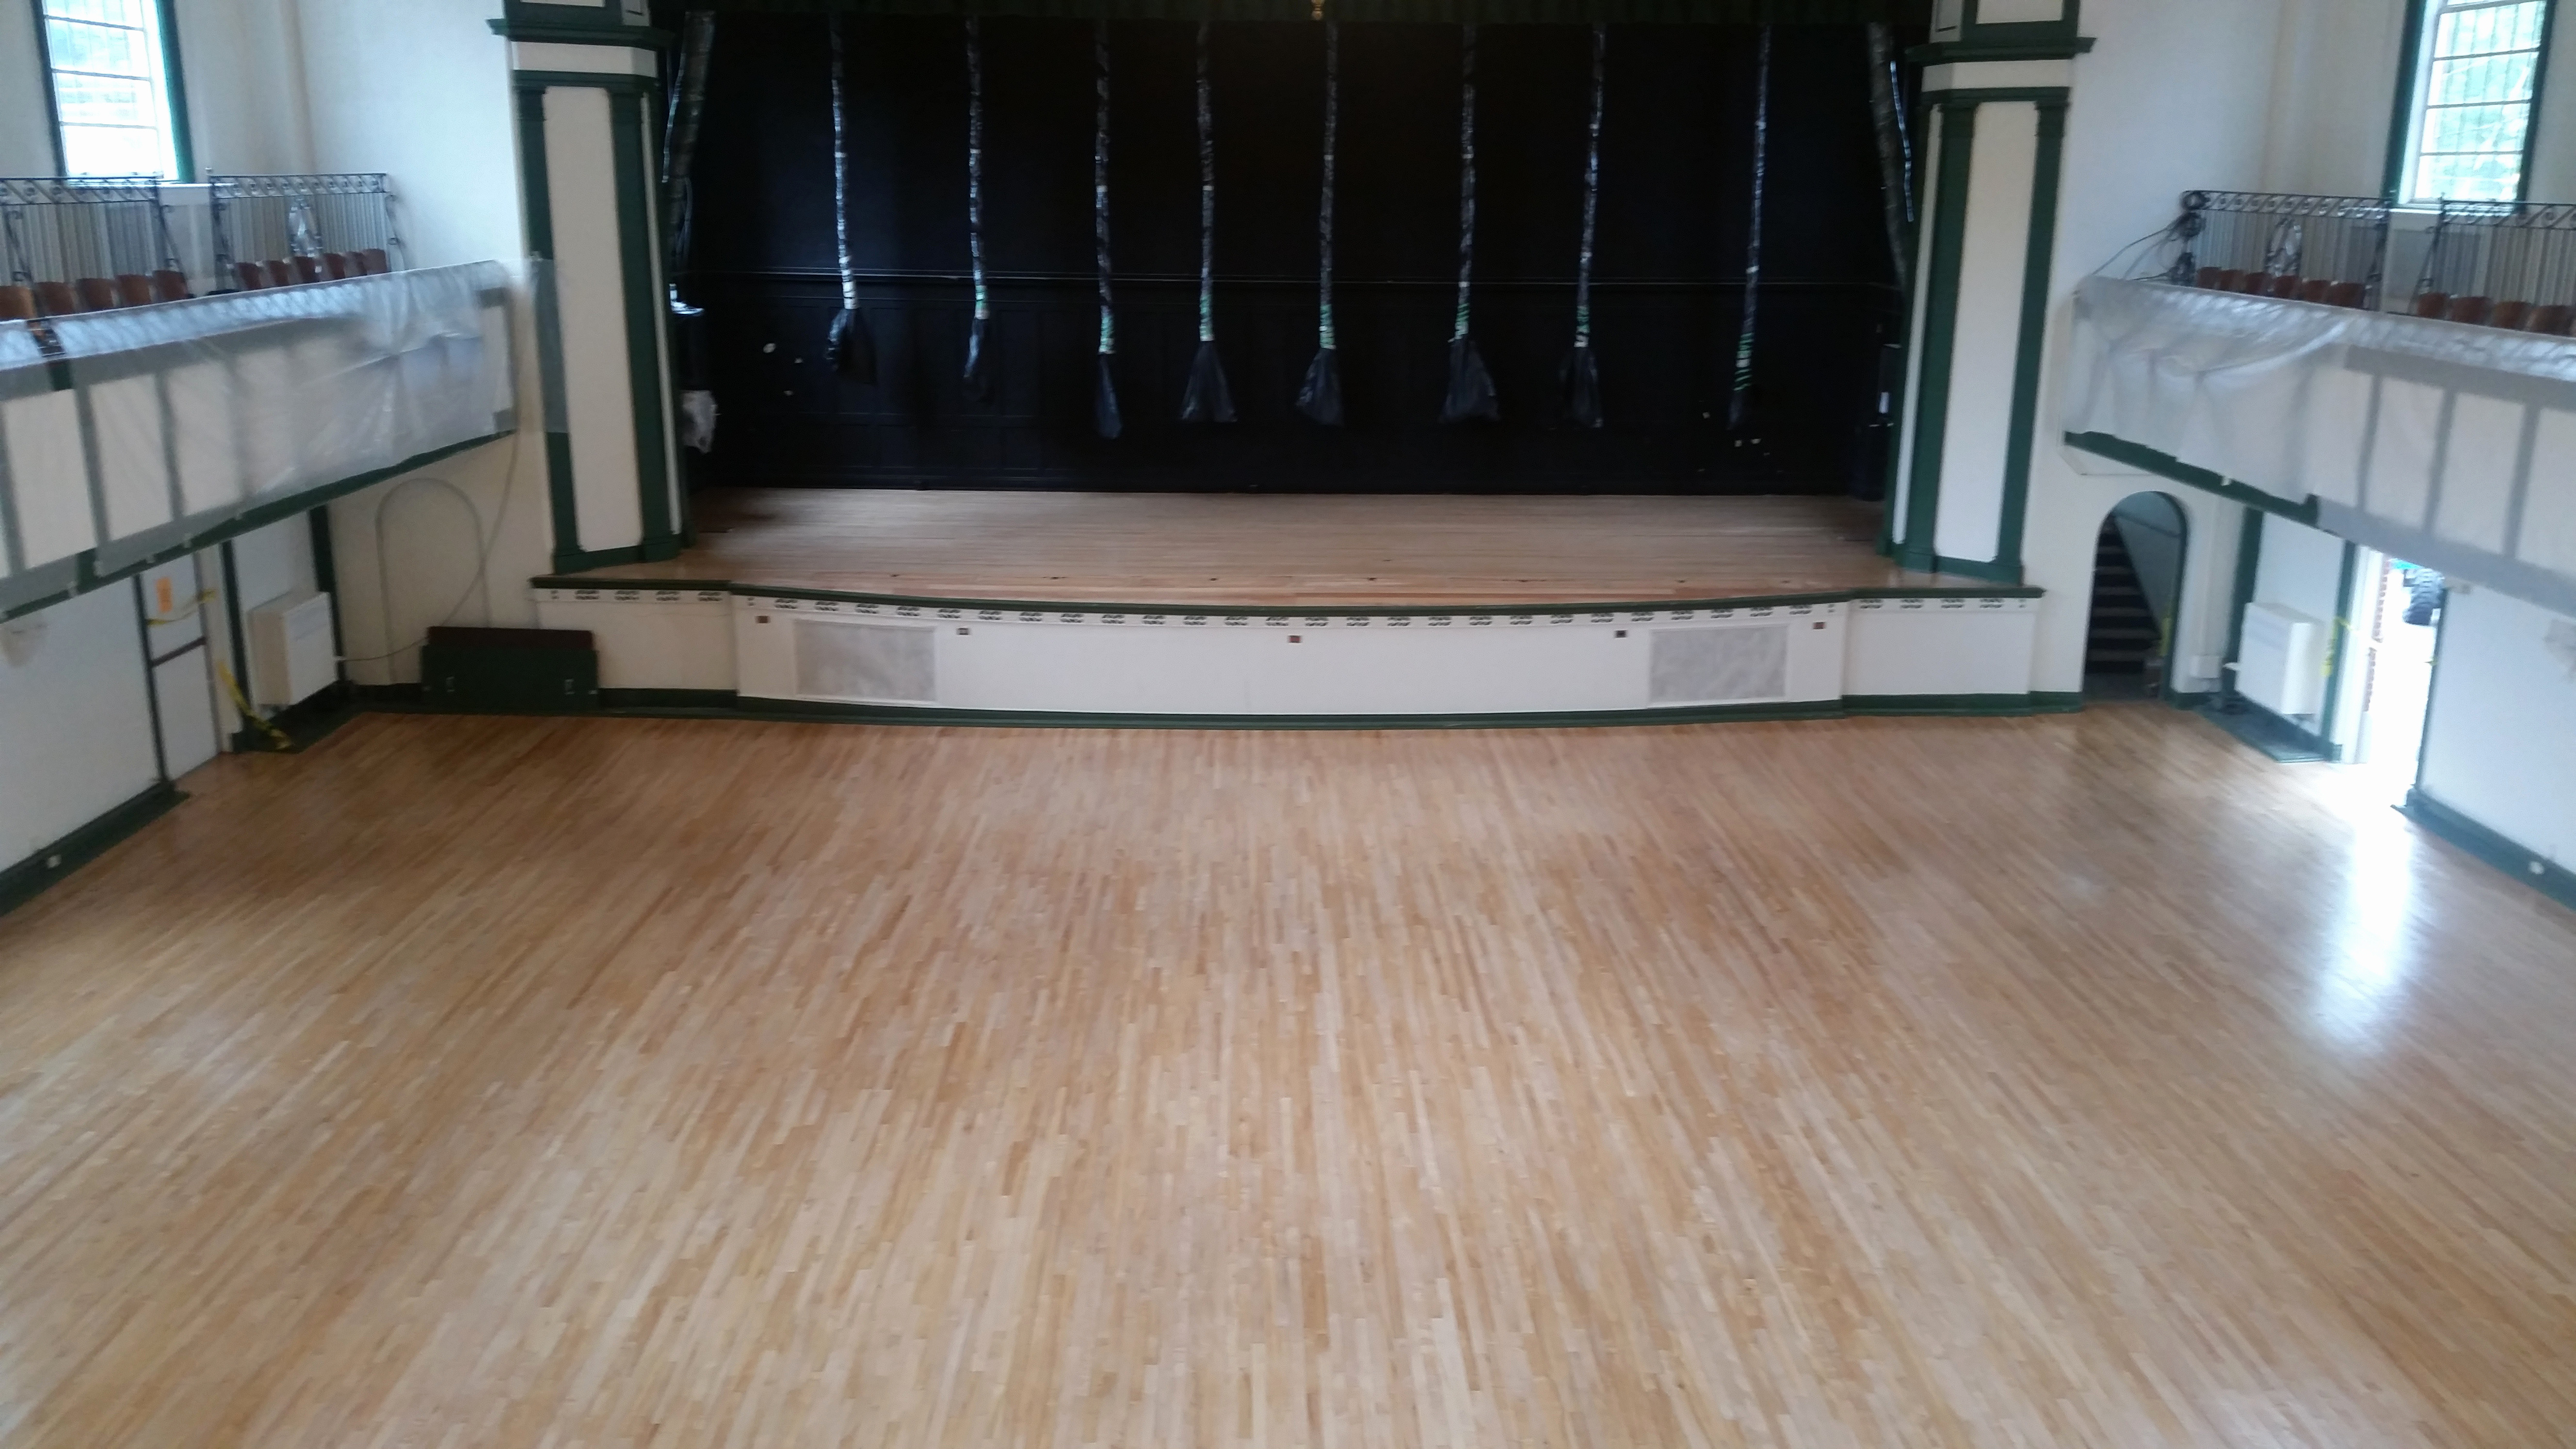 22 Fabulous Hardwood Floor Cleaner Canada 2024 free download hardwood floor cleaner canada of hardwood floor refinishing archives wlcu intended for hardwood floor repair near me picture of rochester hardwood floors of utica home hardwood floor